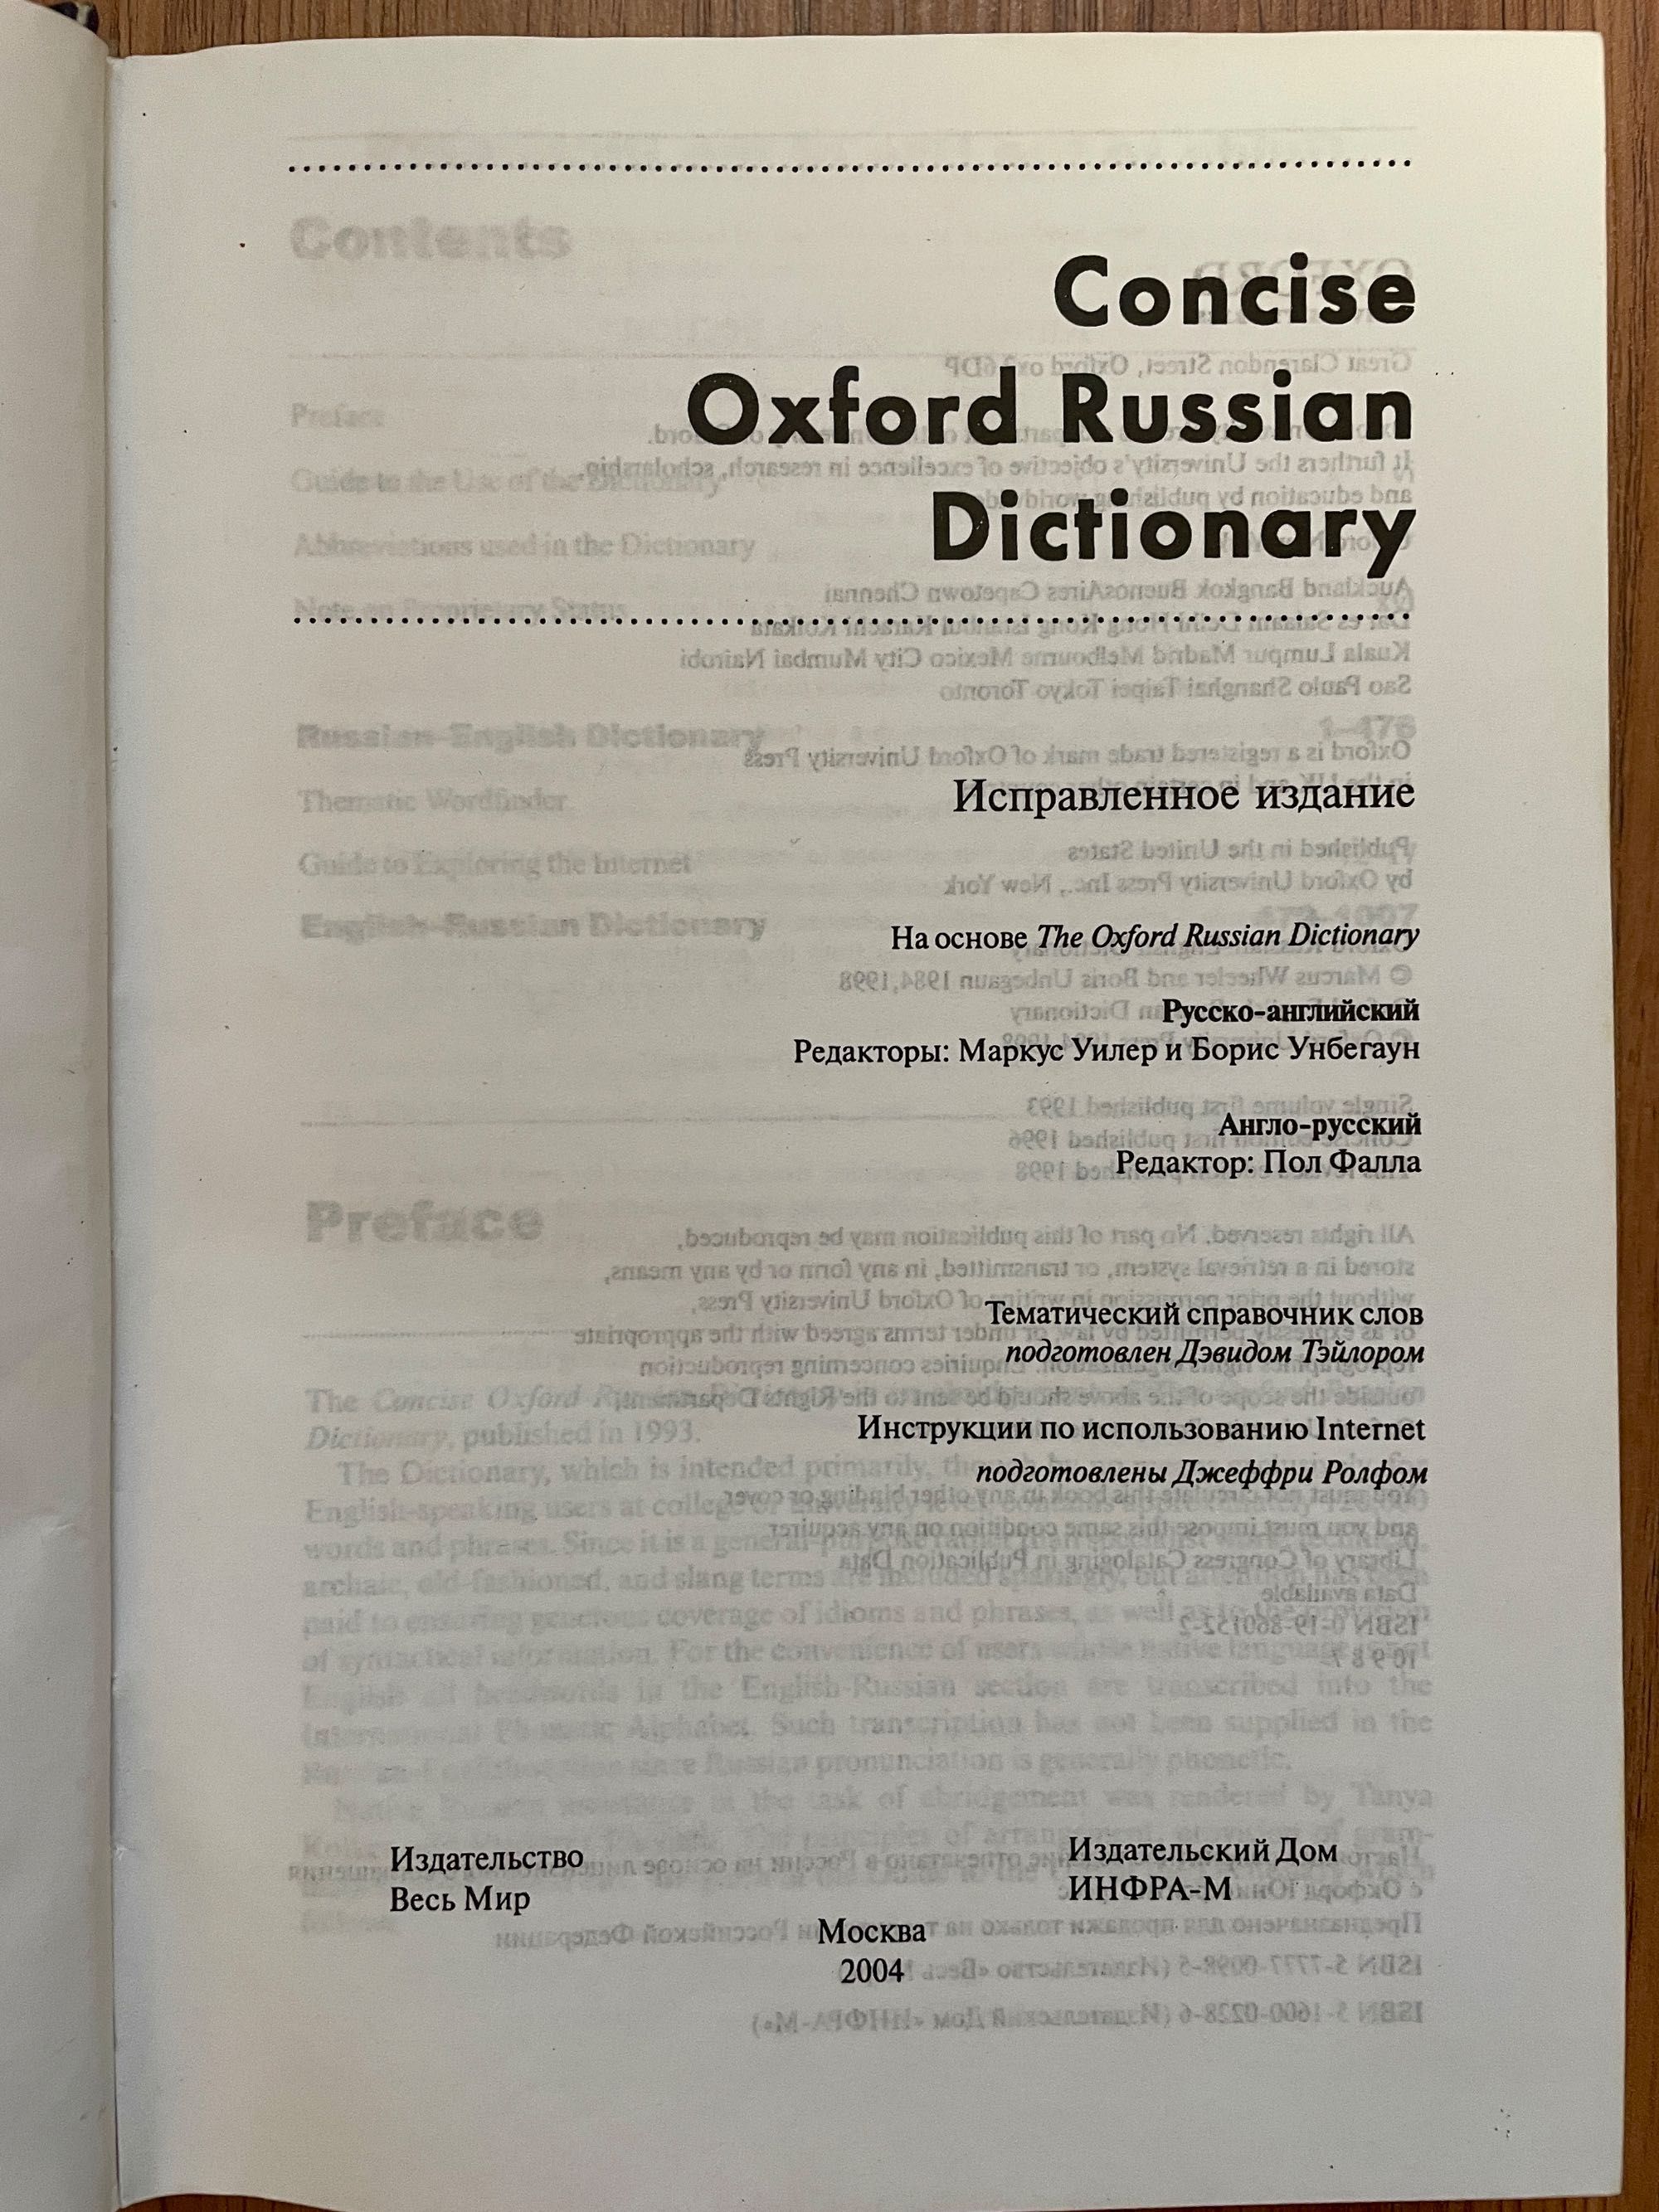 Concise Oxford Russian Dictionary (2004, revised edition)